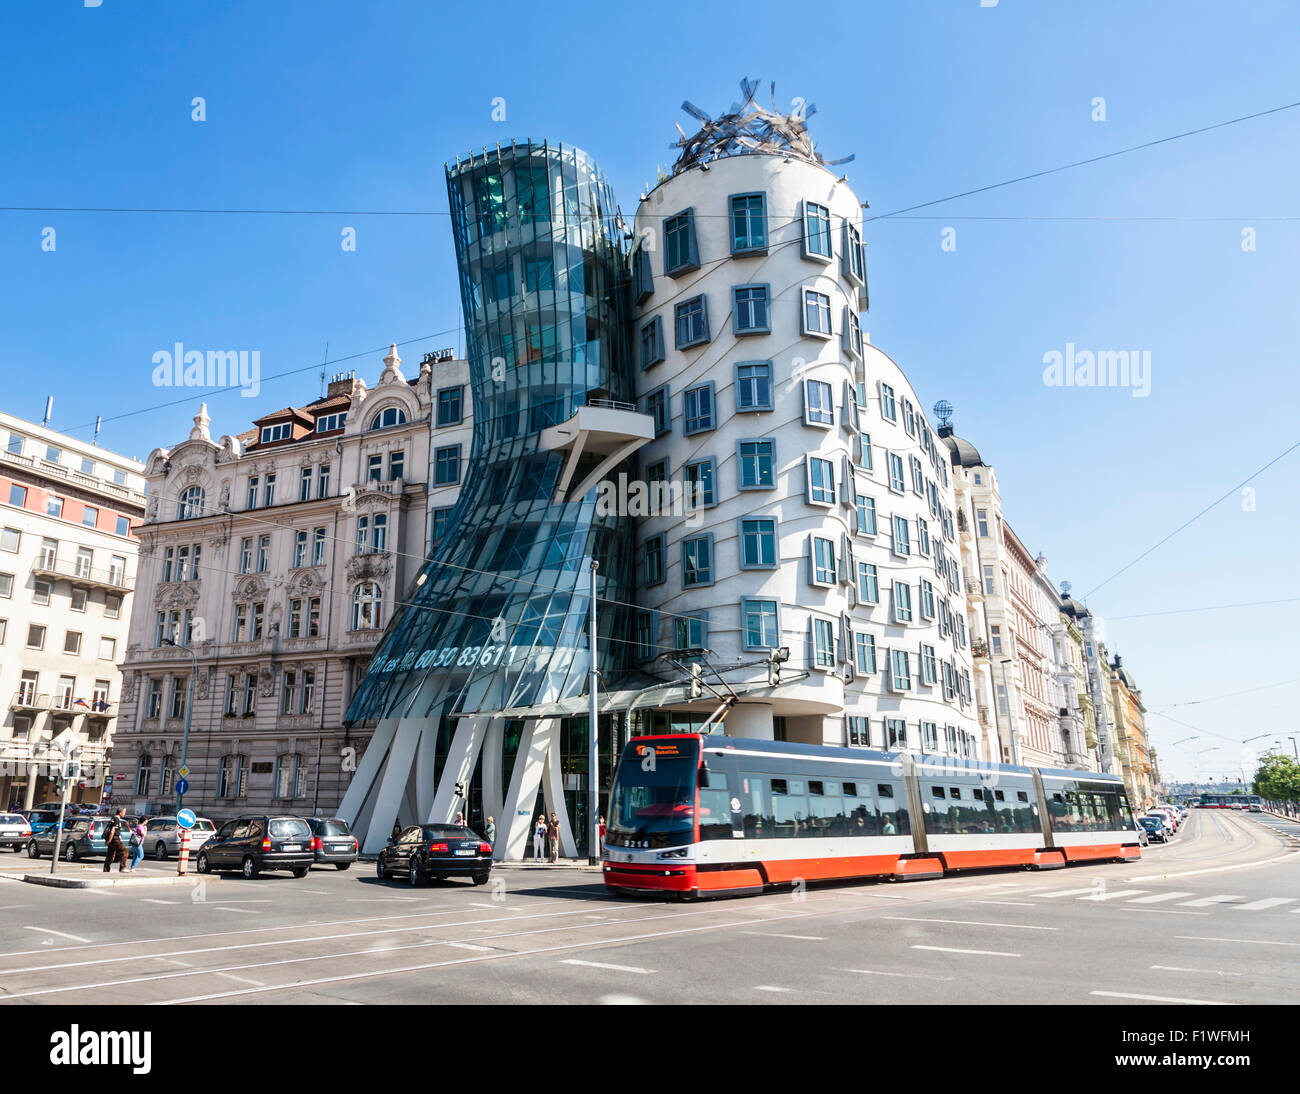 The Dancing House designed by Frank Gehry, Prague, Czech Republic. Stock Photo